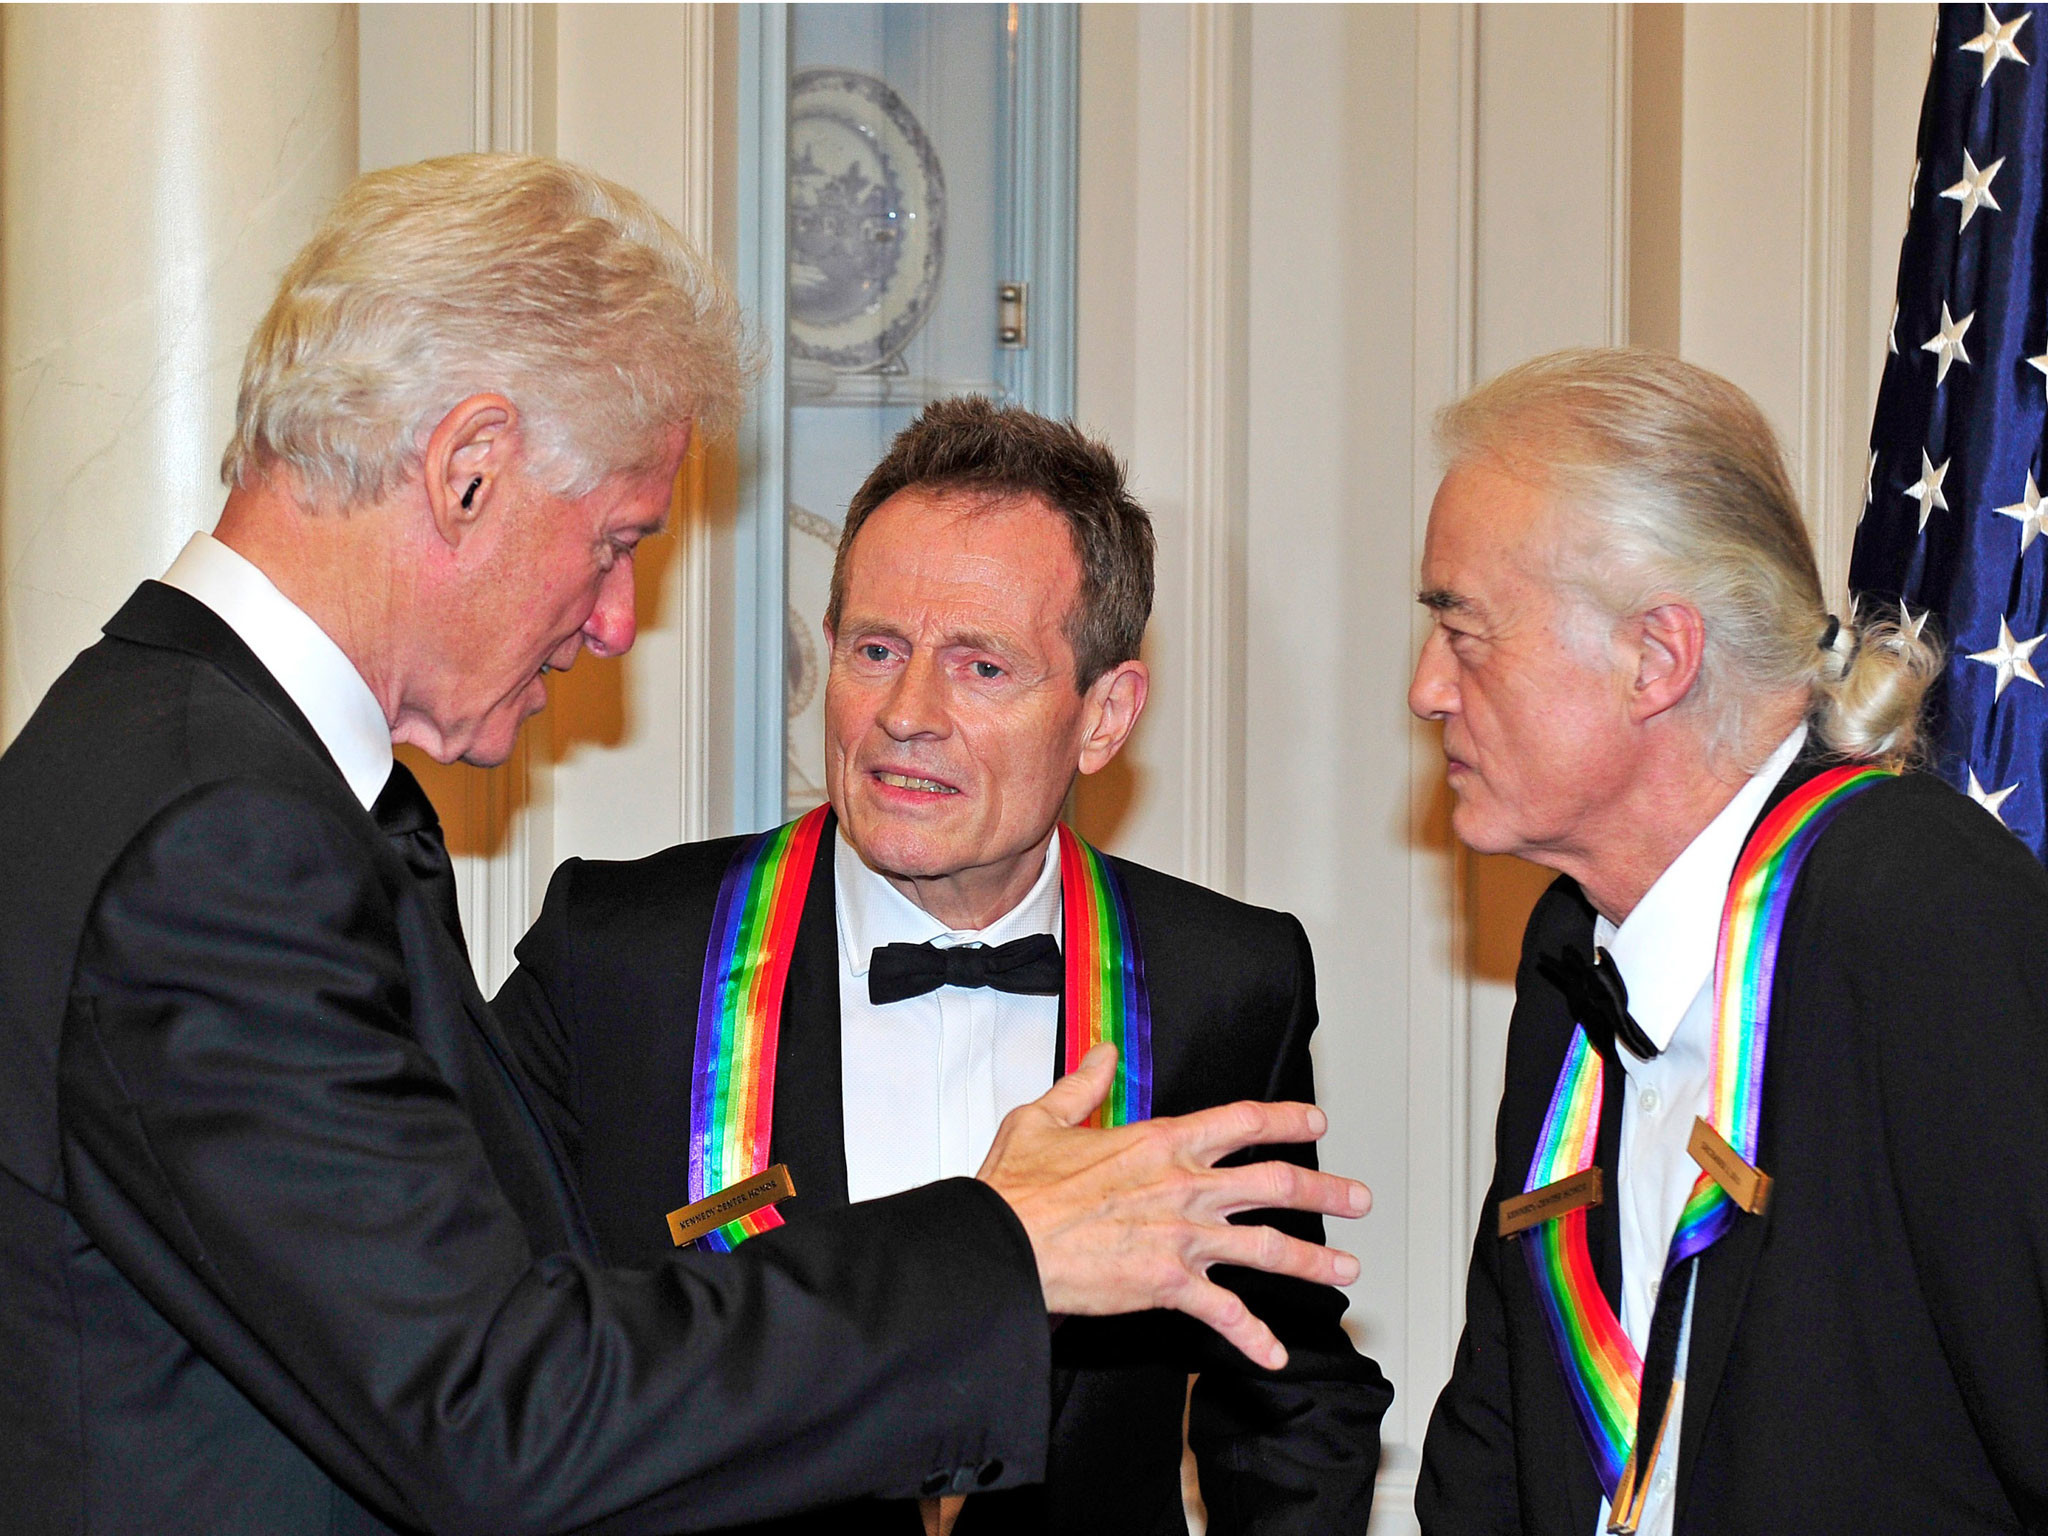 2048x1536 The peace deal even Bill Clinton couldn't broker – a Led Zeppelin reunion |  The Independent